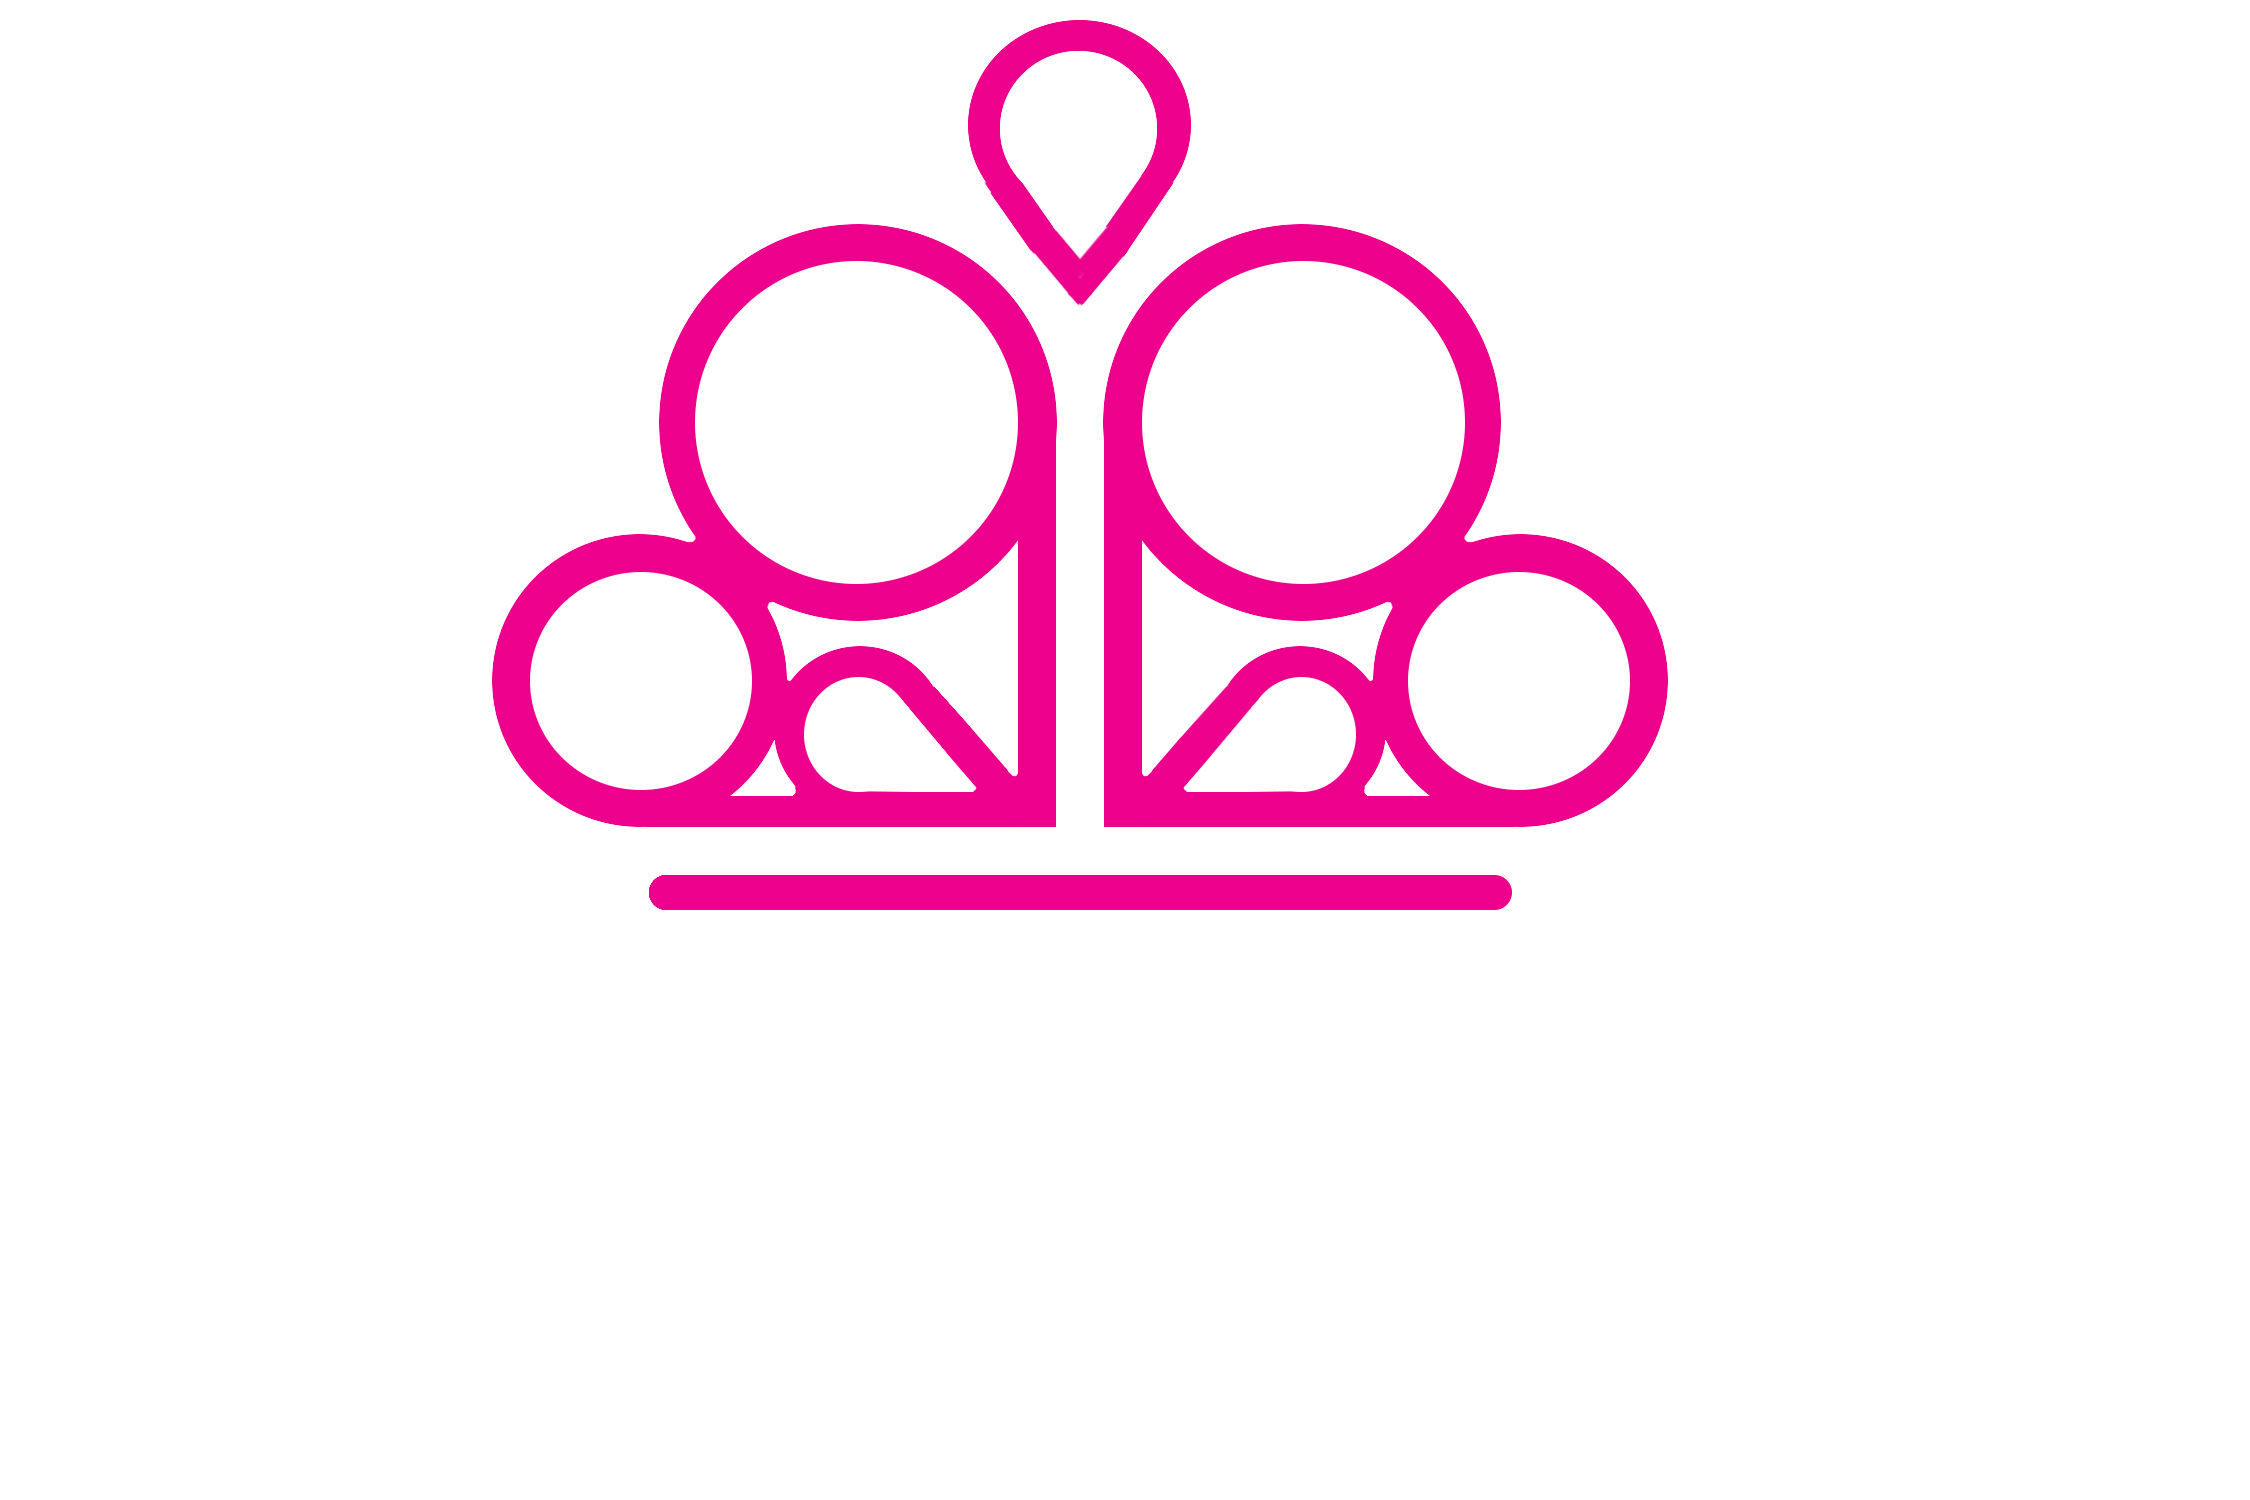 Paparazzi Logo - Paparazzi Accessories logo - clear background with white letters ...